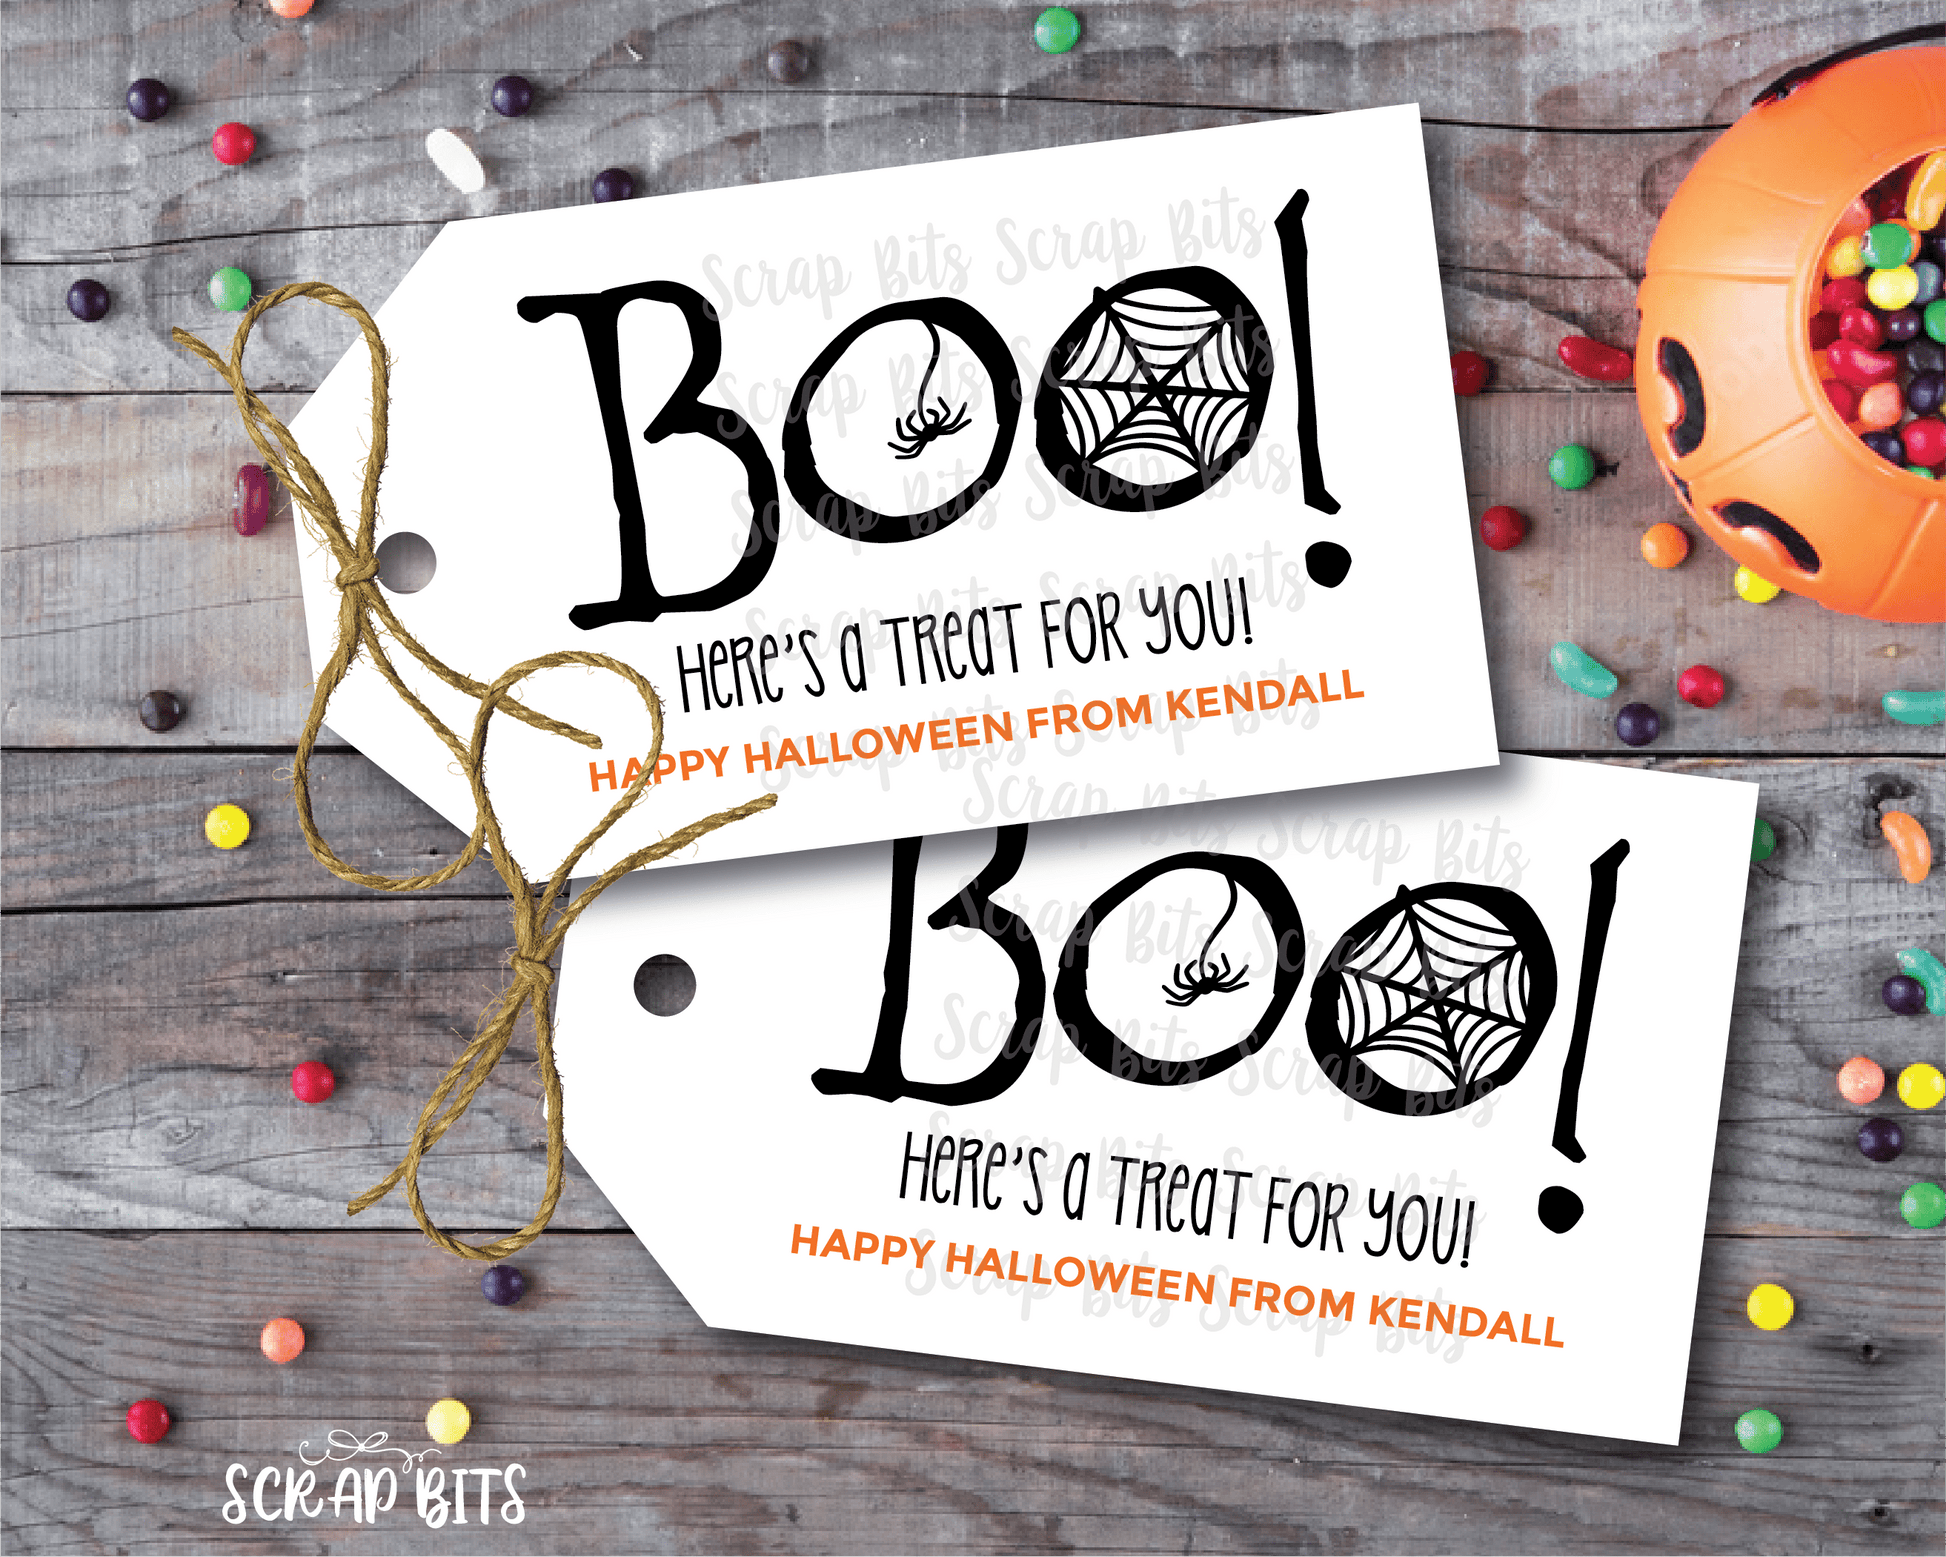 BOO Here's a Treat For You . Halloween Treat Bag Tags - Scrap Bits